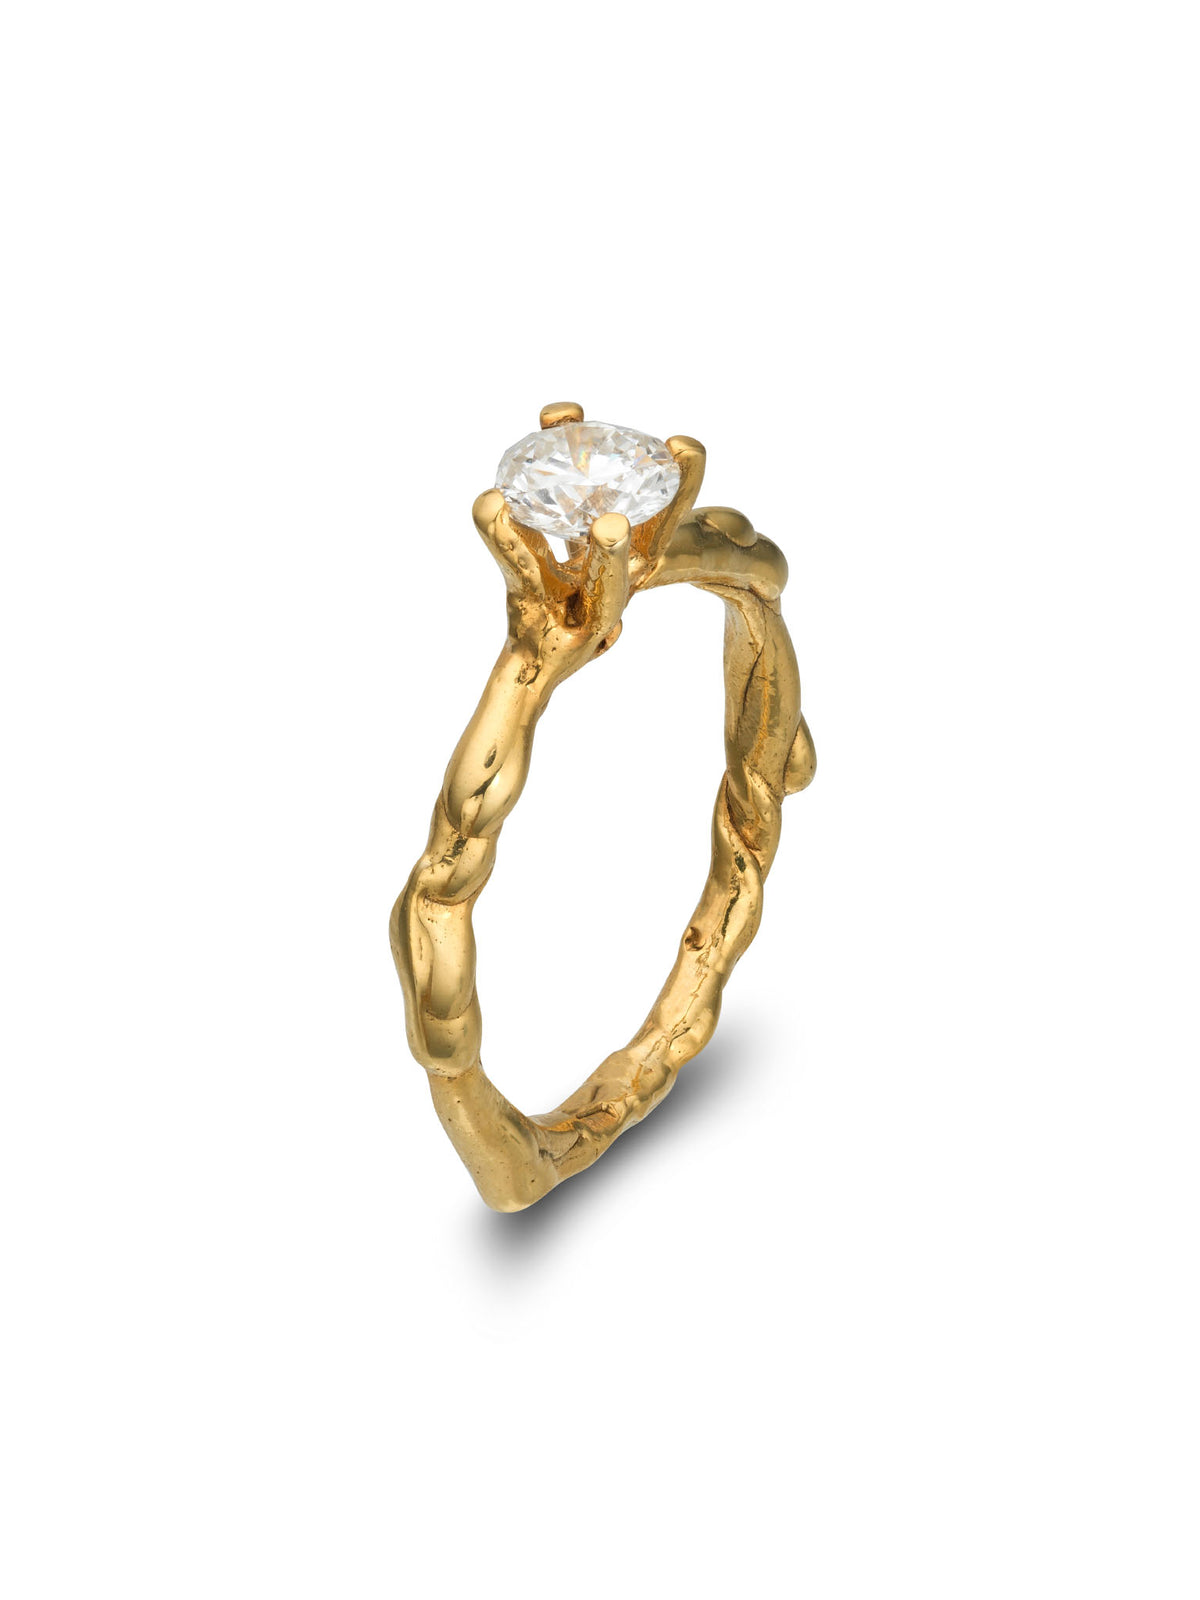 Eternity Engagement Ring / Gold